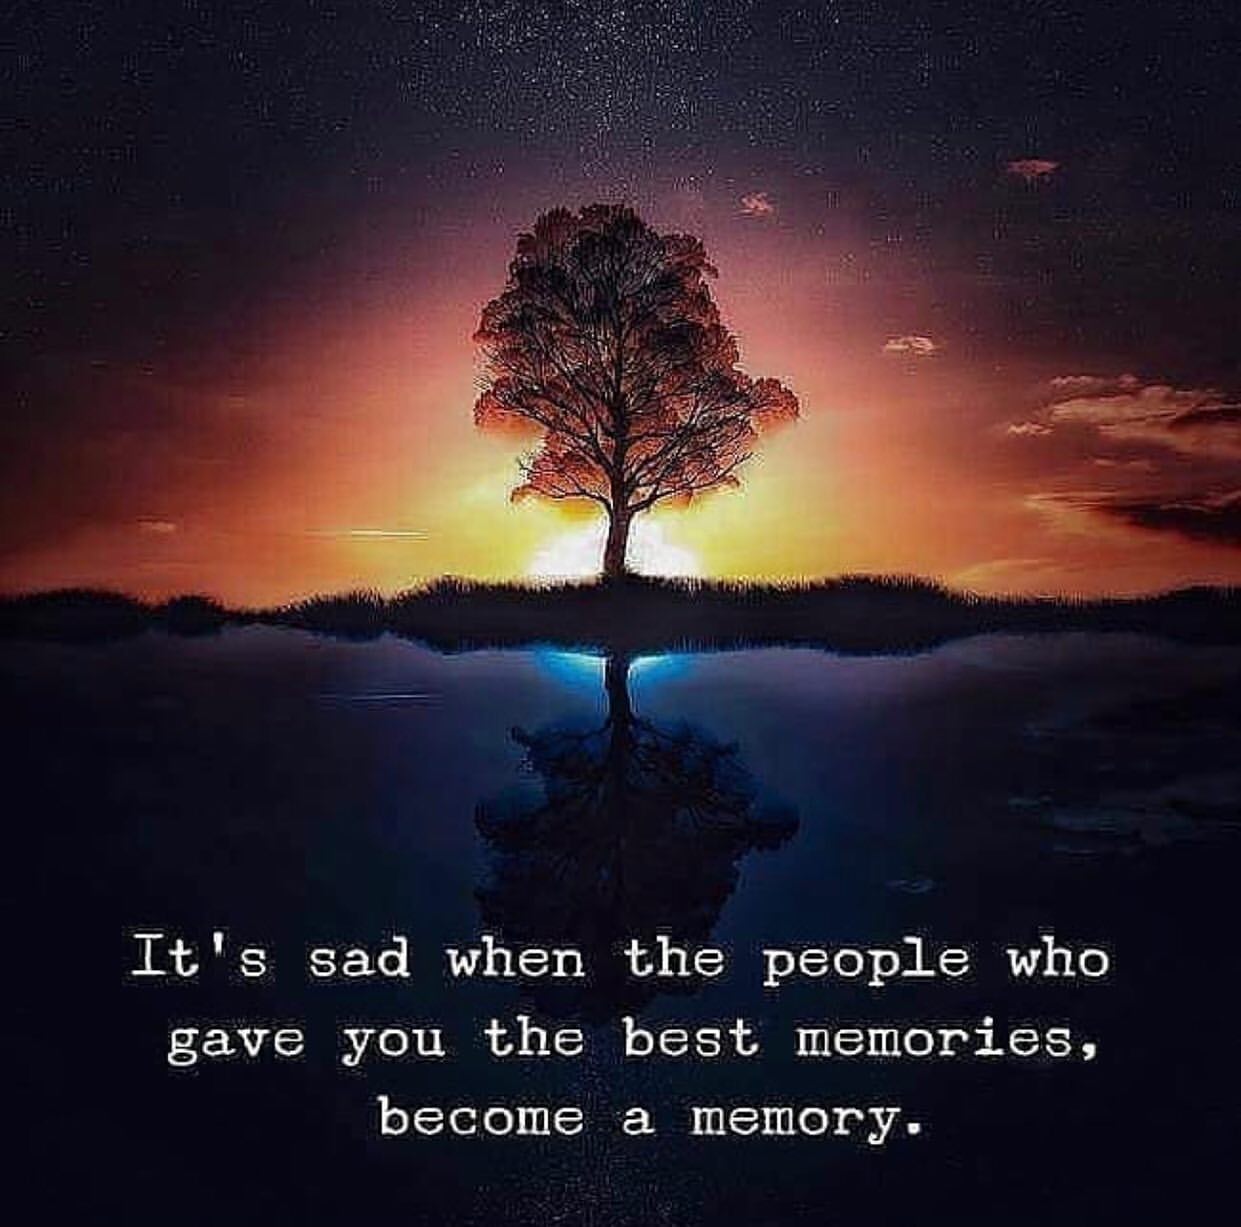 It's sad when the people who gave you the best memories, become a memory.